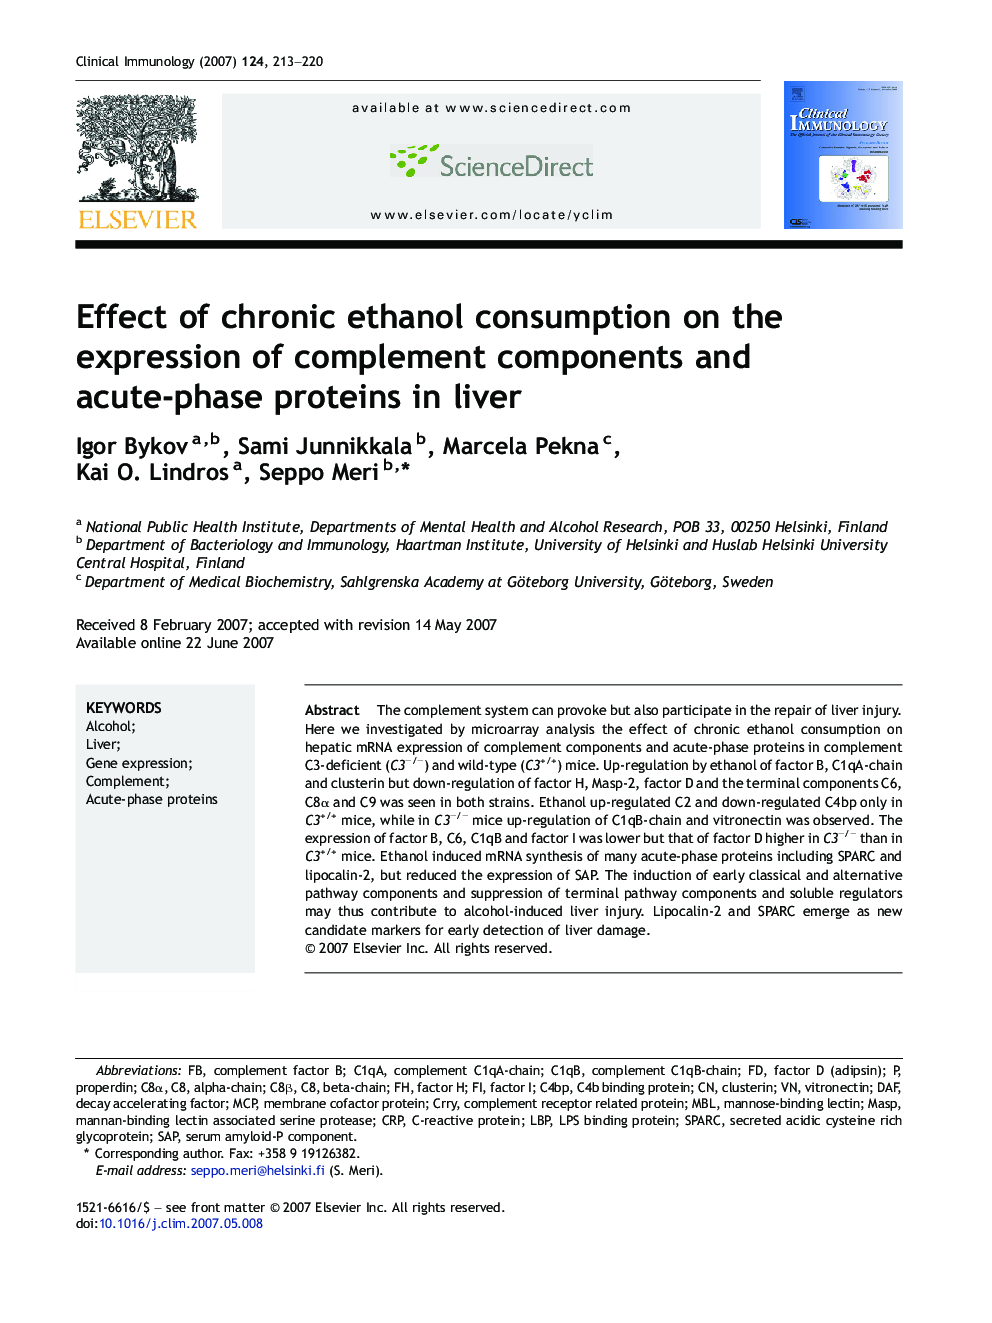 Effect of chronic ethanol consumption on the expression of complement components and acute-phase proteins in liver